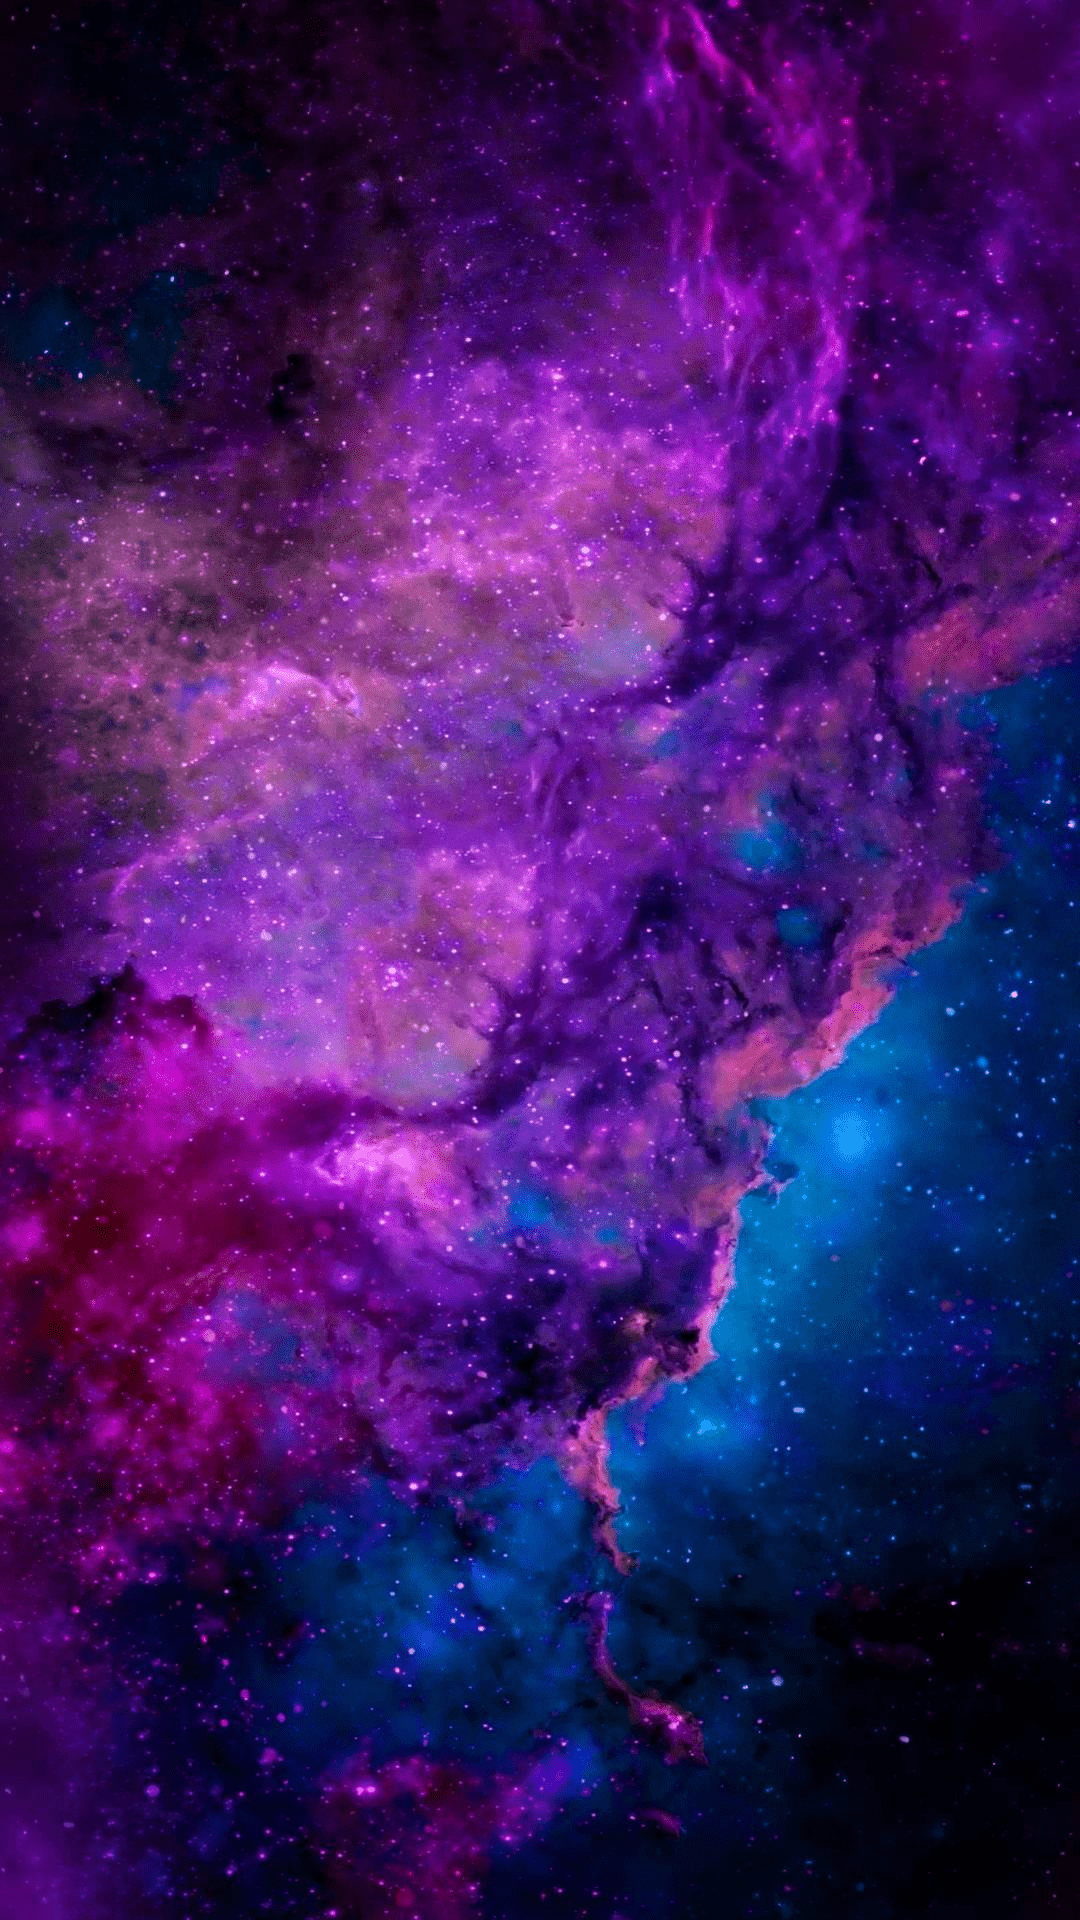 IPhone wallpaper of the day: Space. - Bisexual